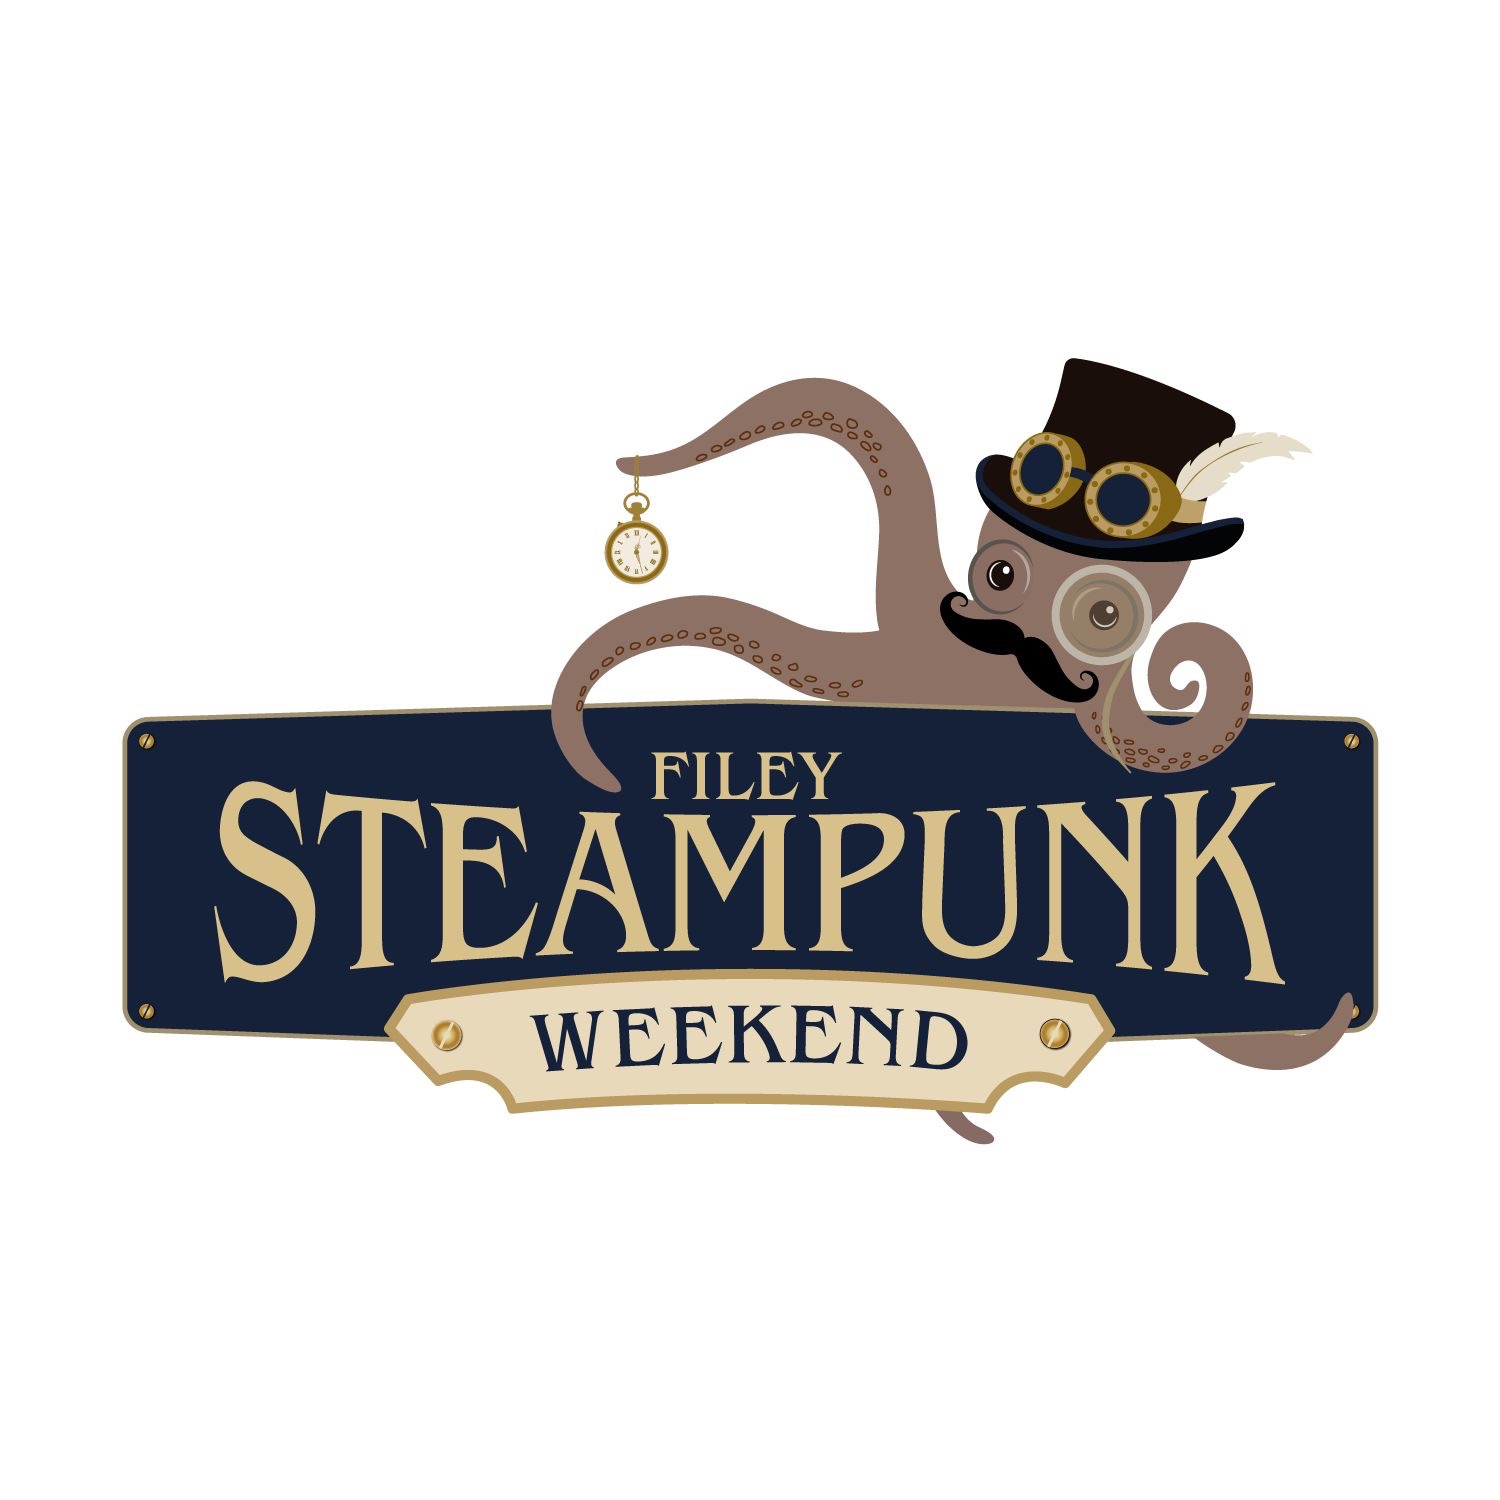 Logo design for Filey Steampunk weekend - Octopus Called Oswald, with steampunk style